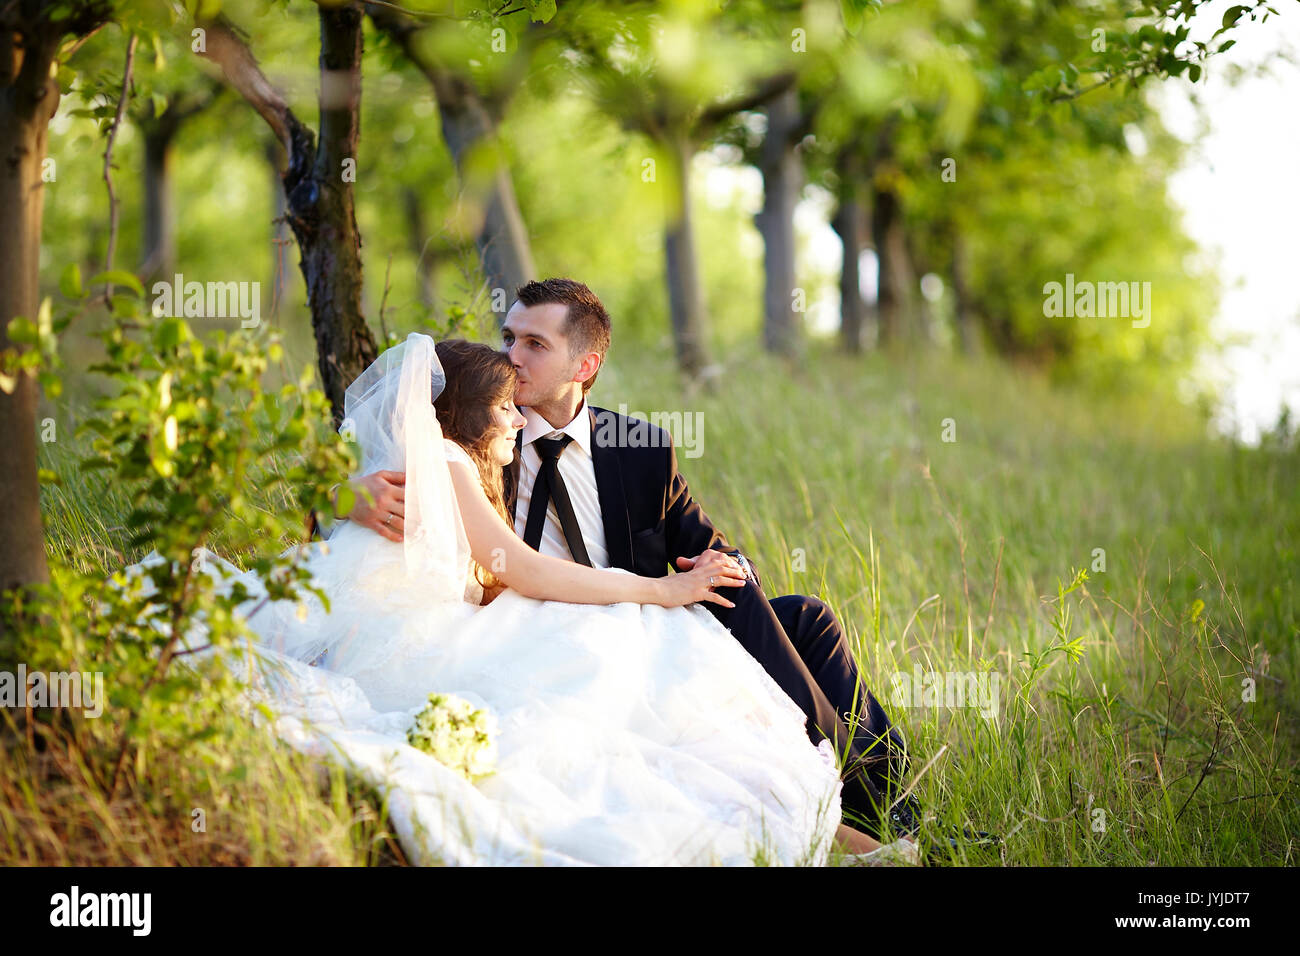 The bride and groom embrace in the garden. Stock Photo